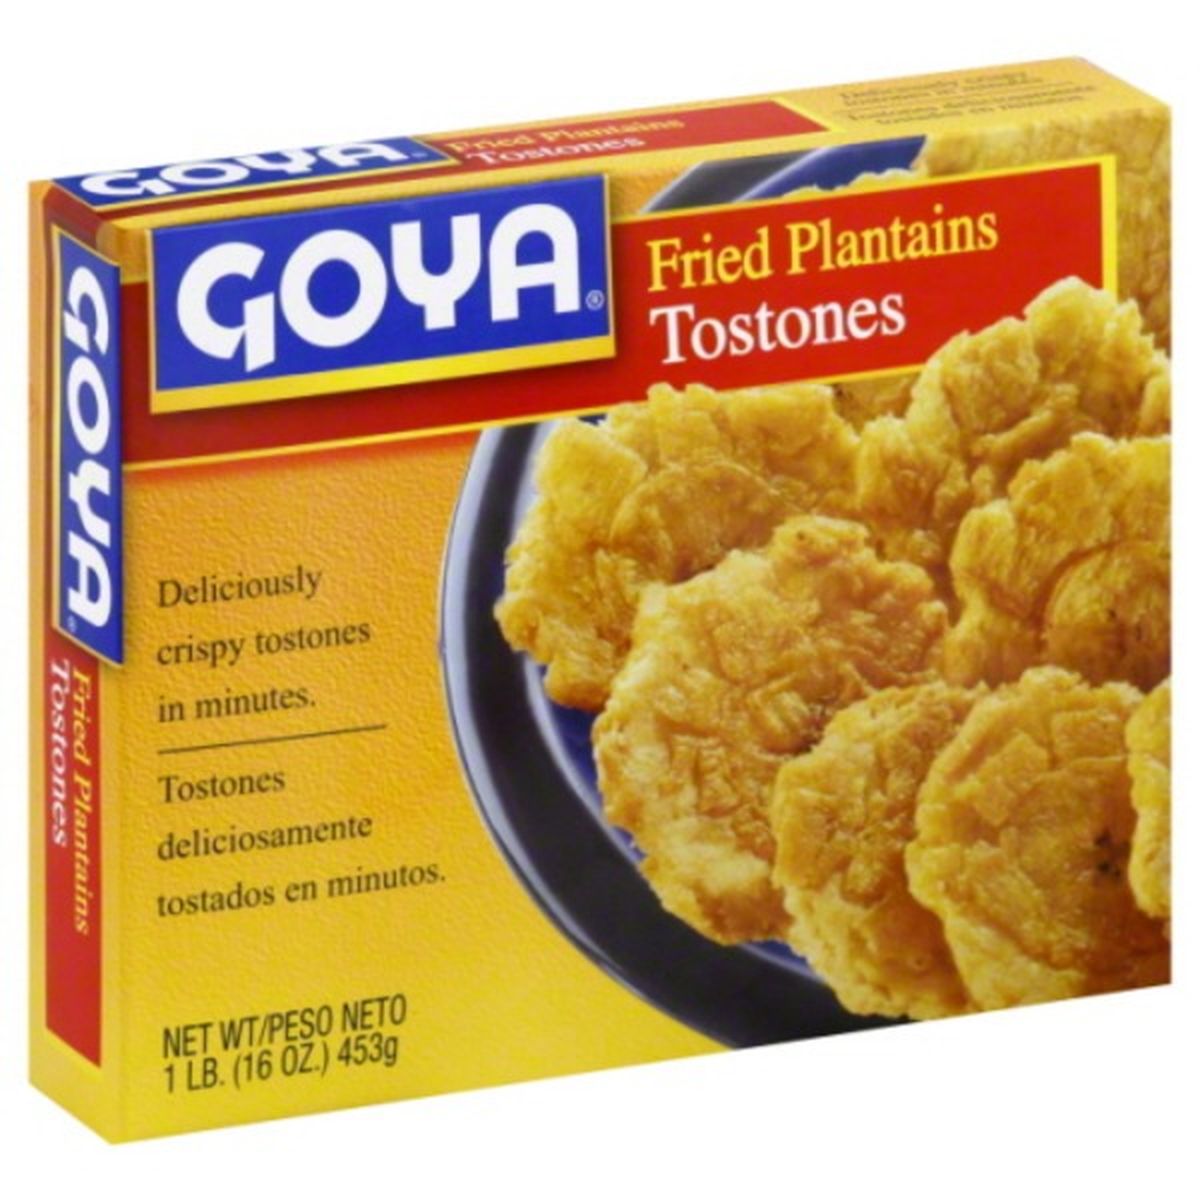 Calories in Goya Tostones, Fried Plantains